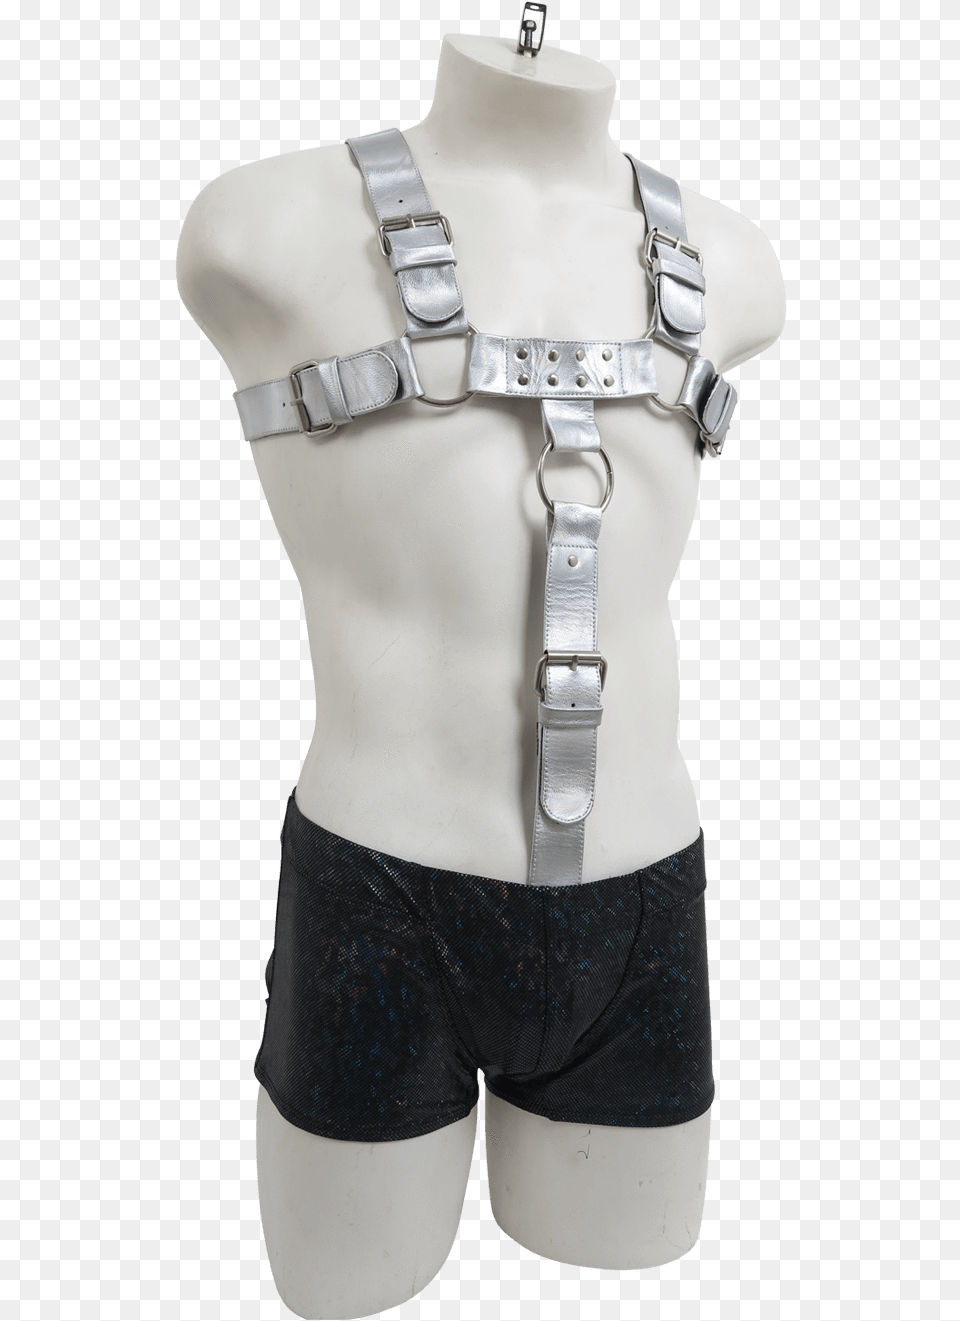 Mannequin, Accessories, Clothing, Shorts, Harness Png